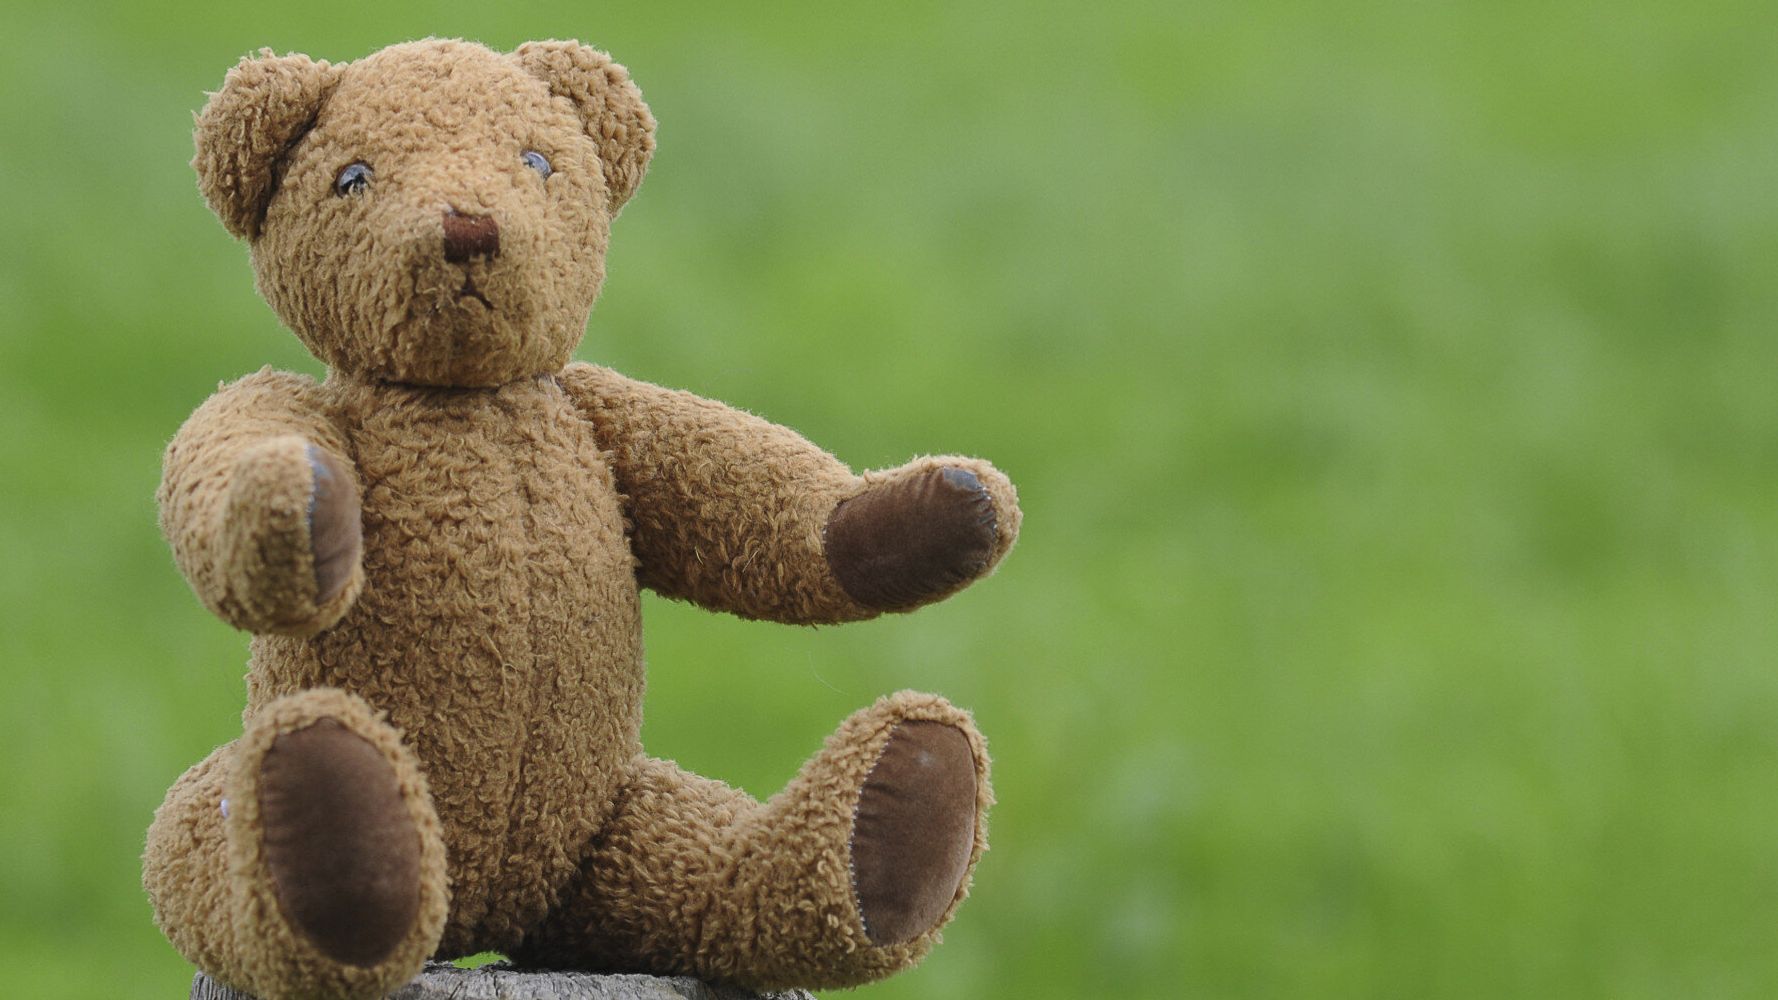 Burglar Nabbed After Having Sex With Teddy Bear And Leaving Dna 